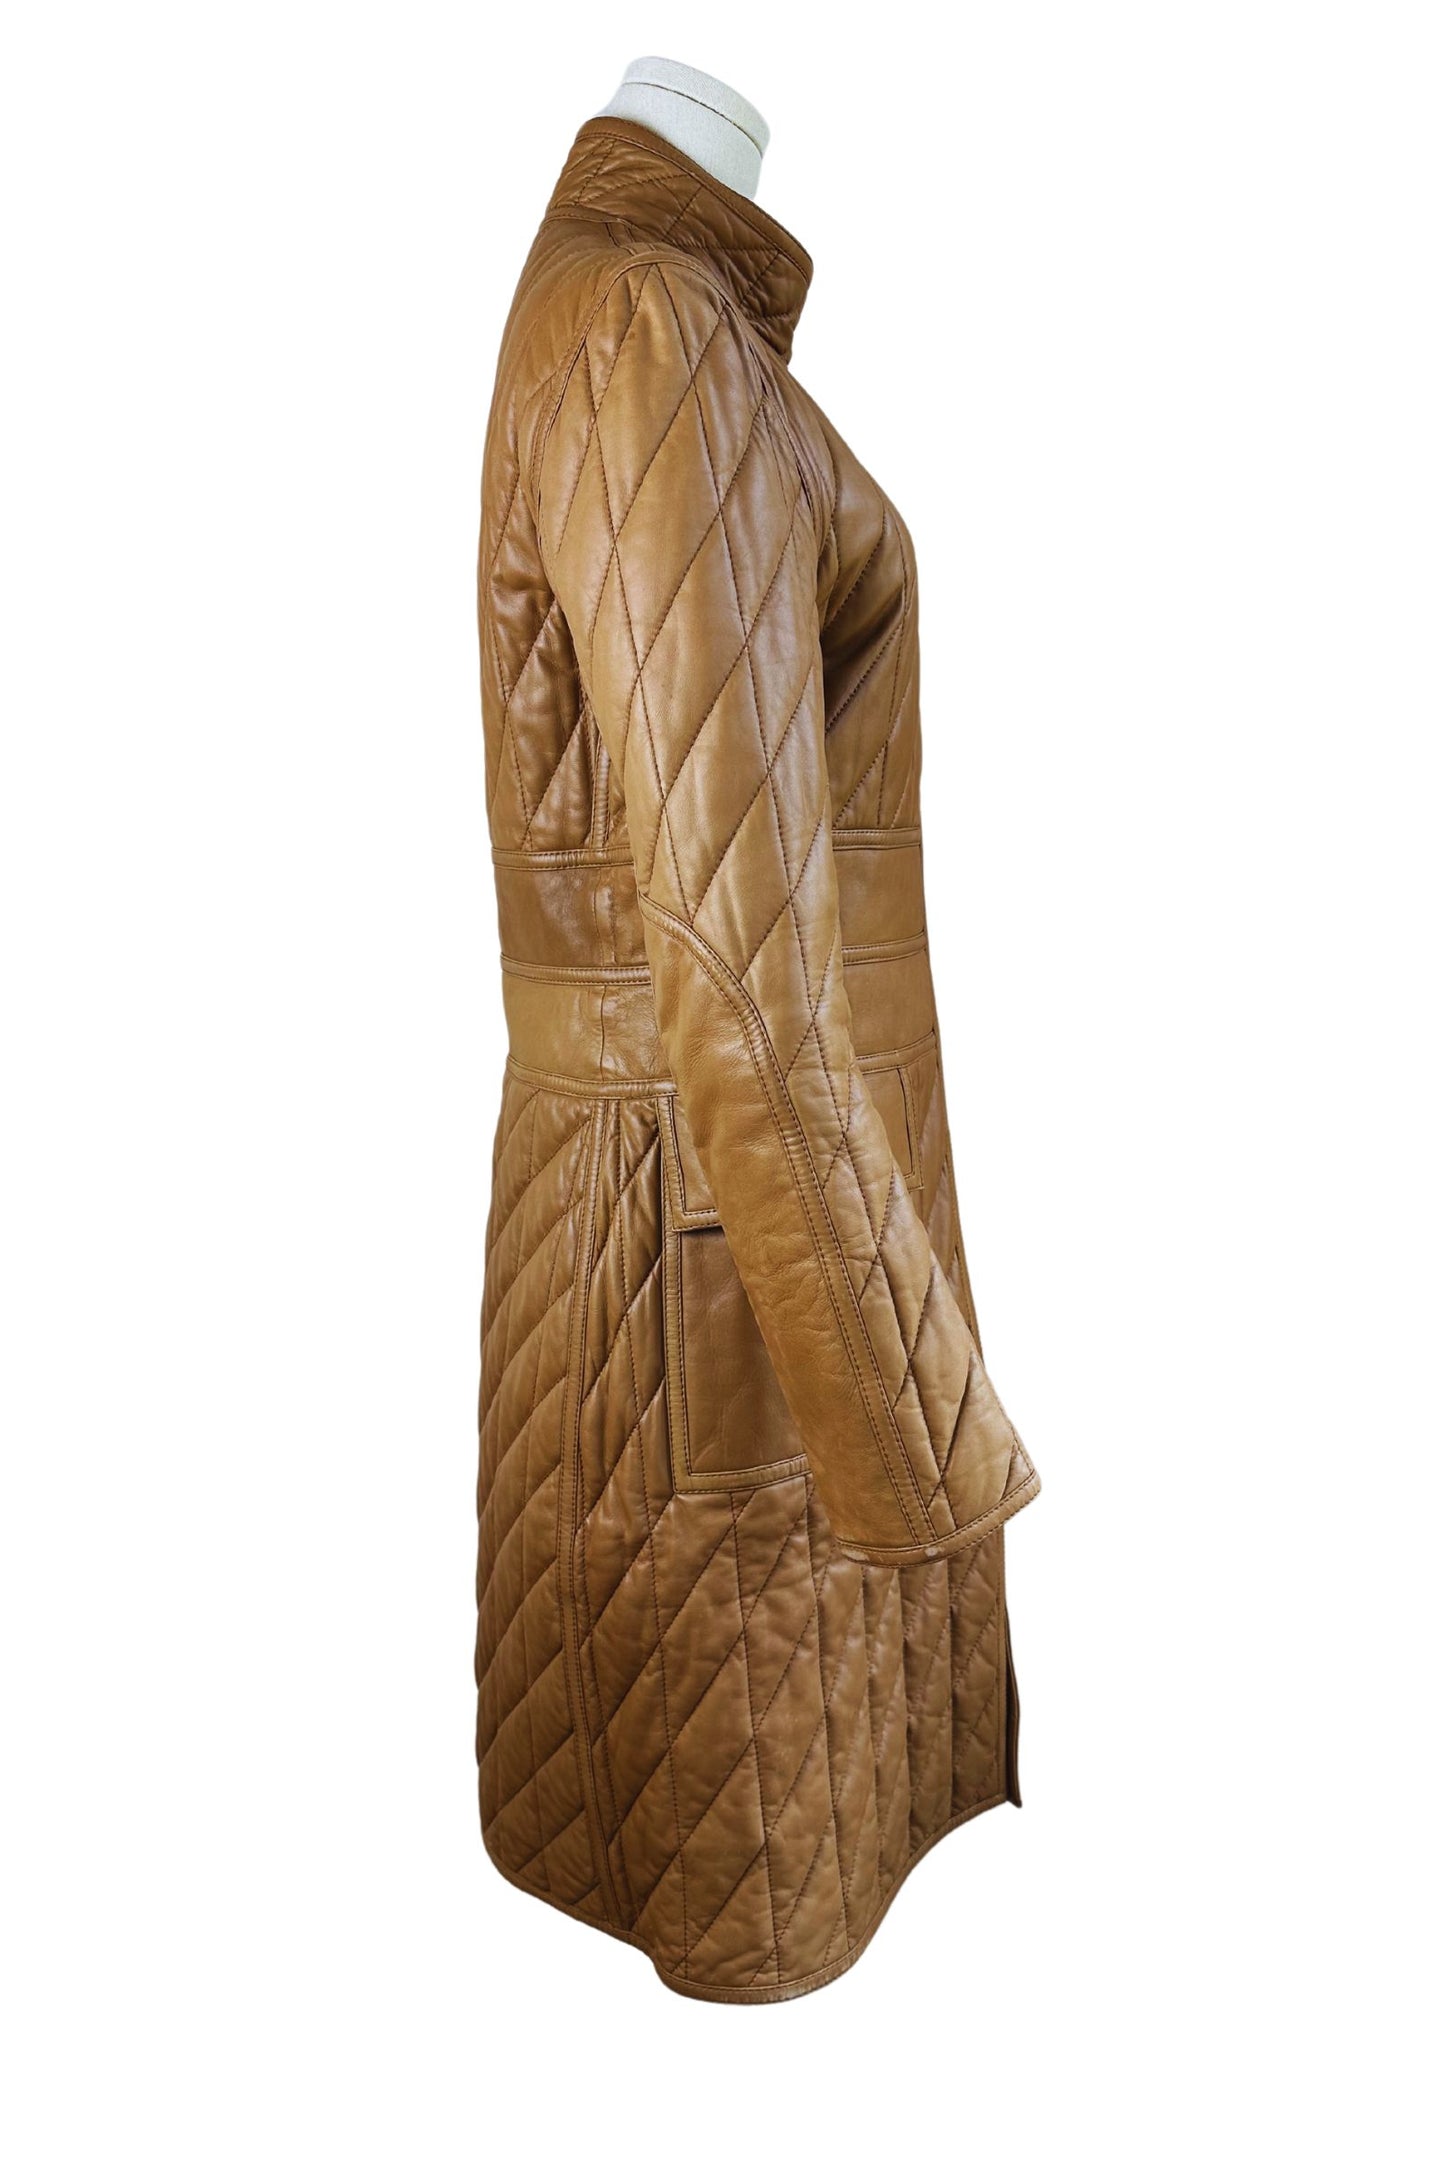 Gucci by Tom Ford F/W 2000 Documented Ready-To-Wear Runway Collection Quilted Leather Coat Size IT44